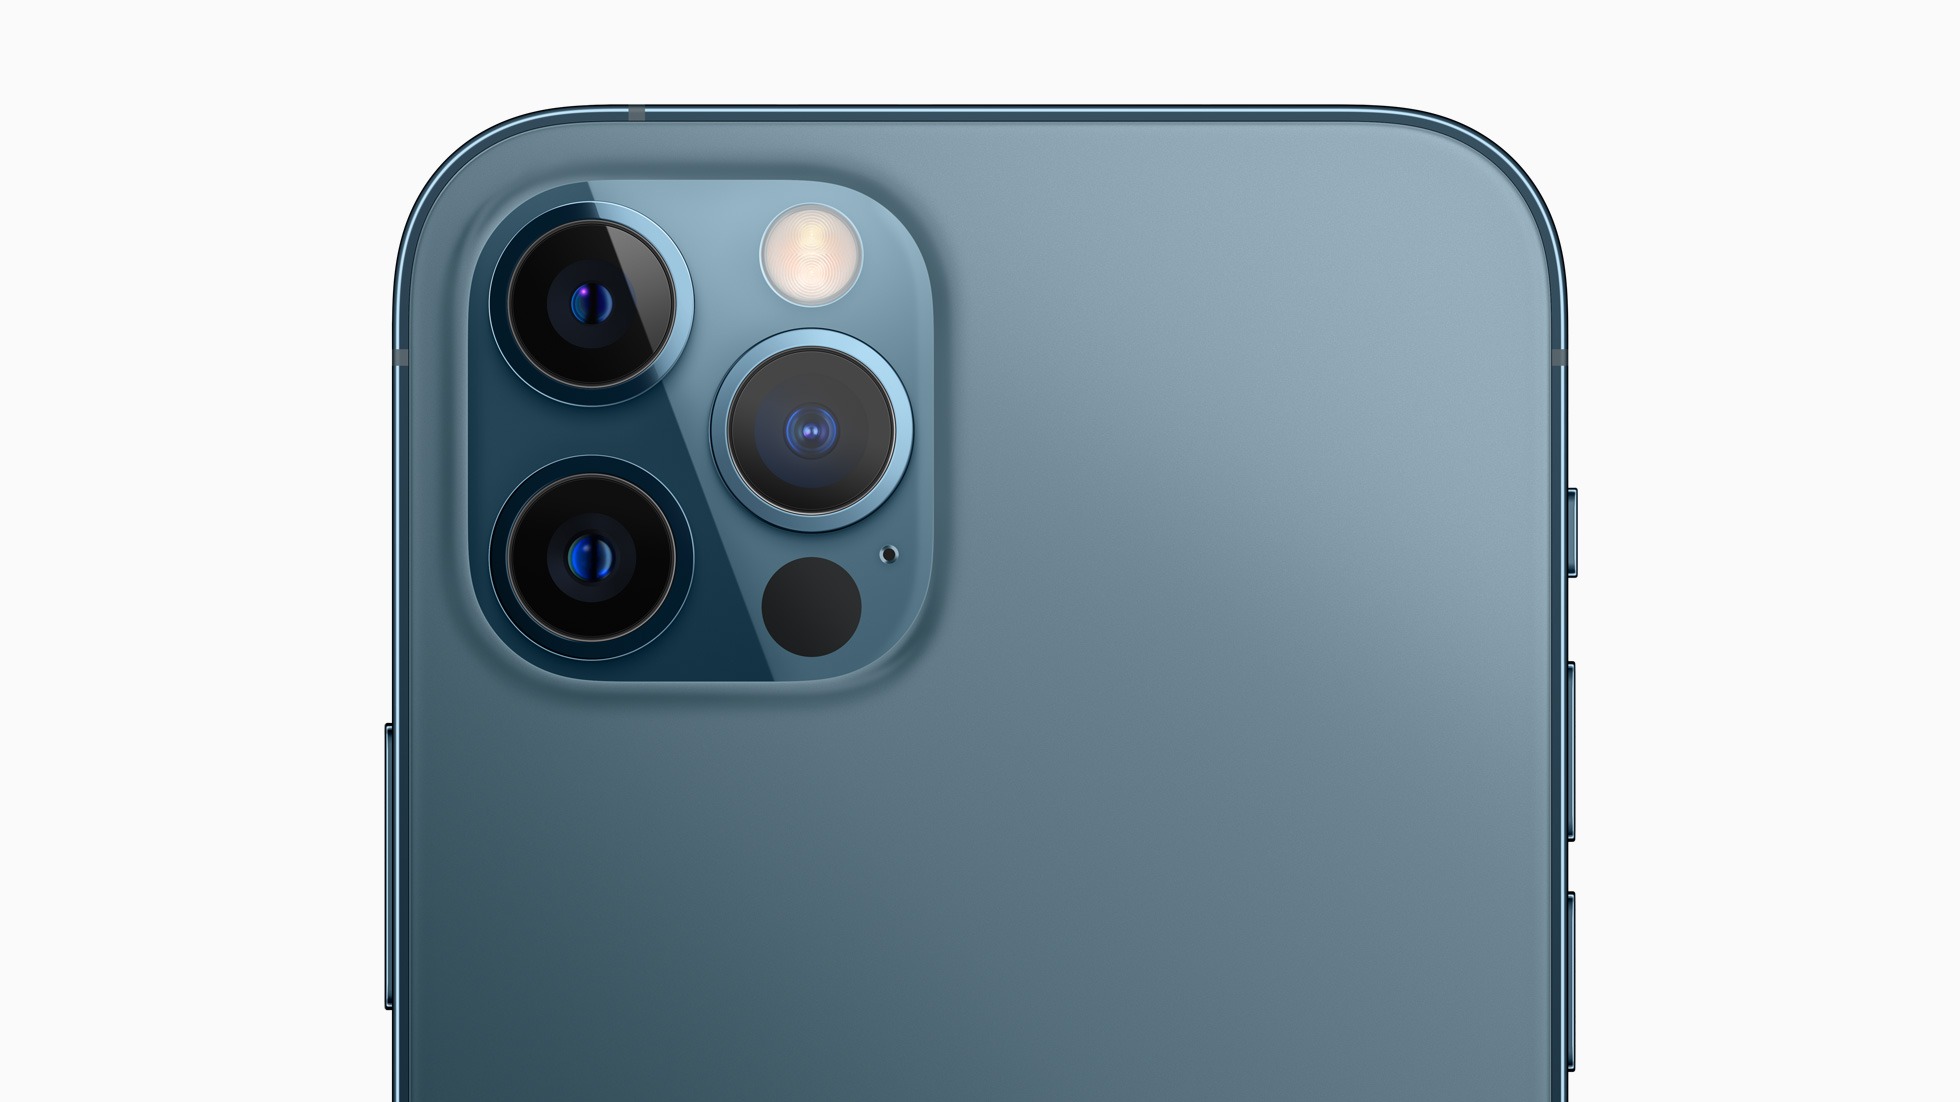 The iPhone 12 Pro’s camera array.